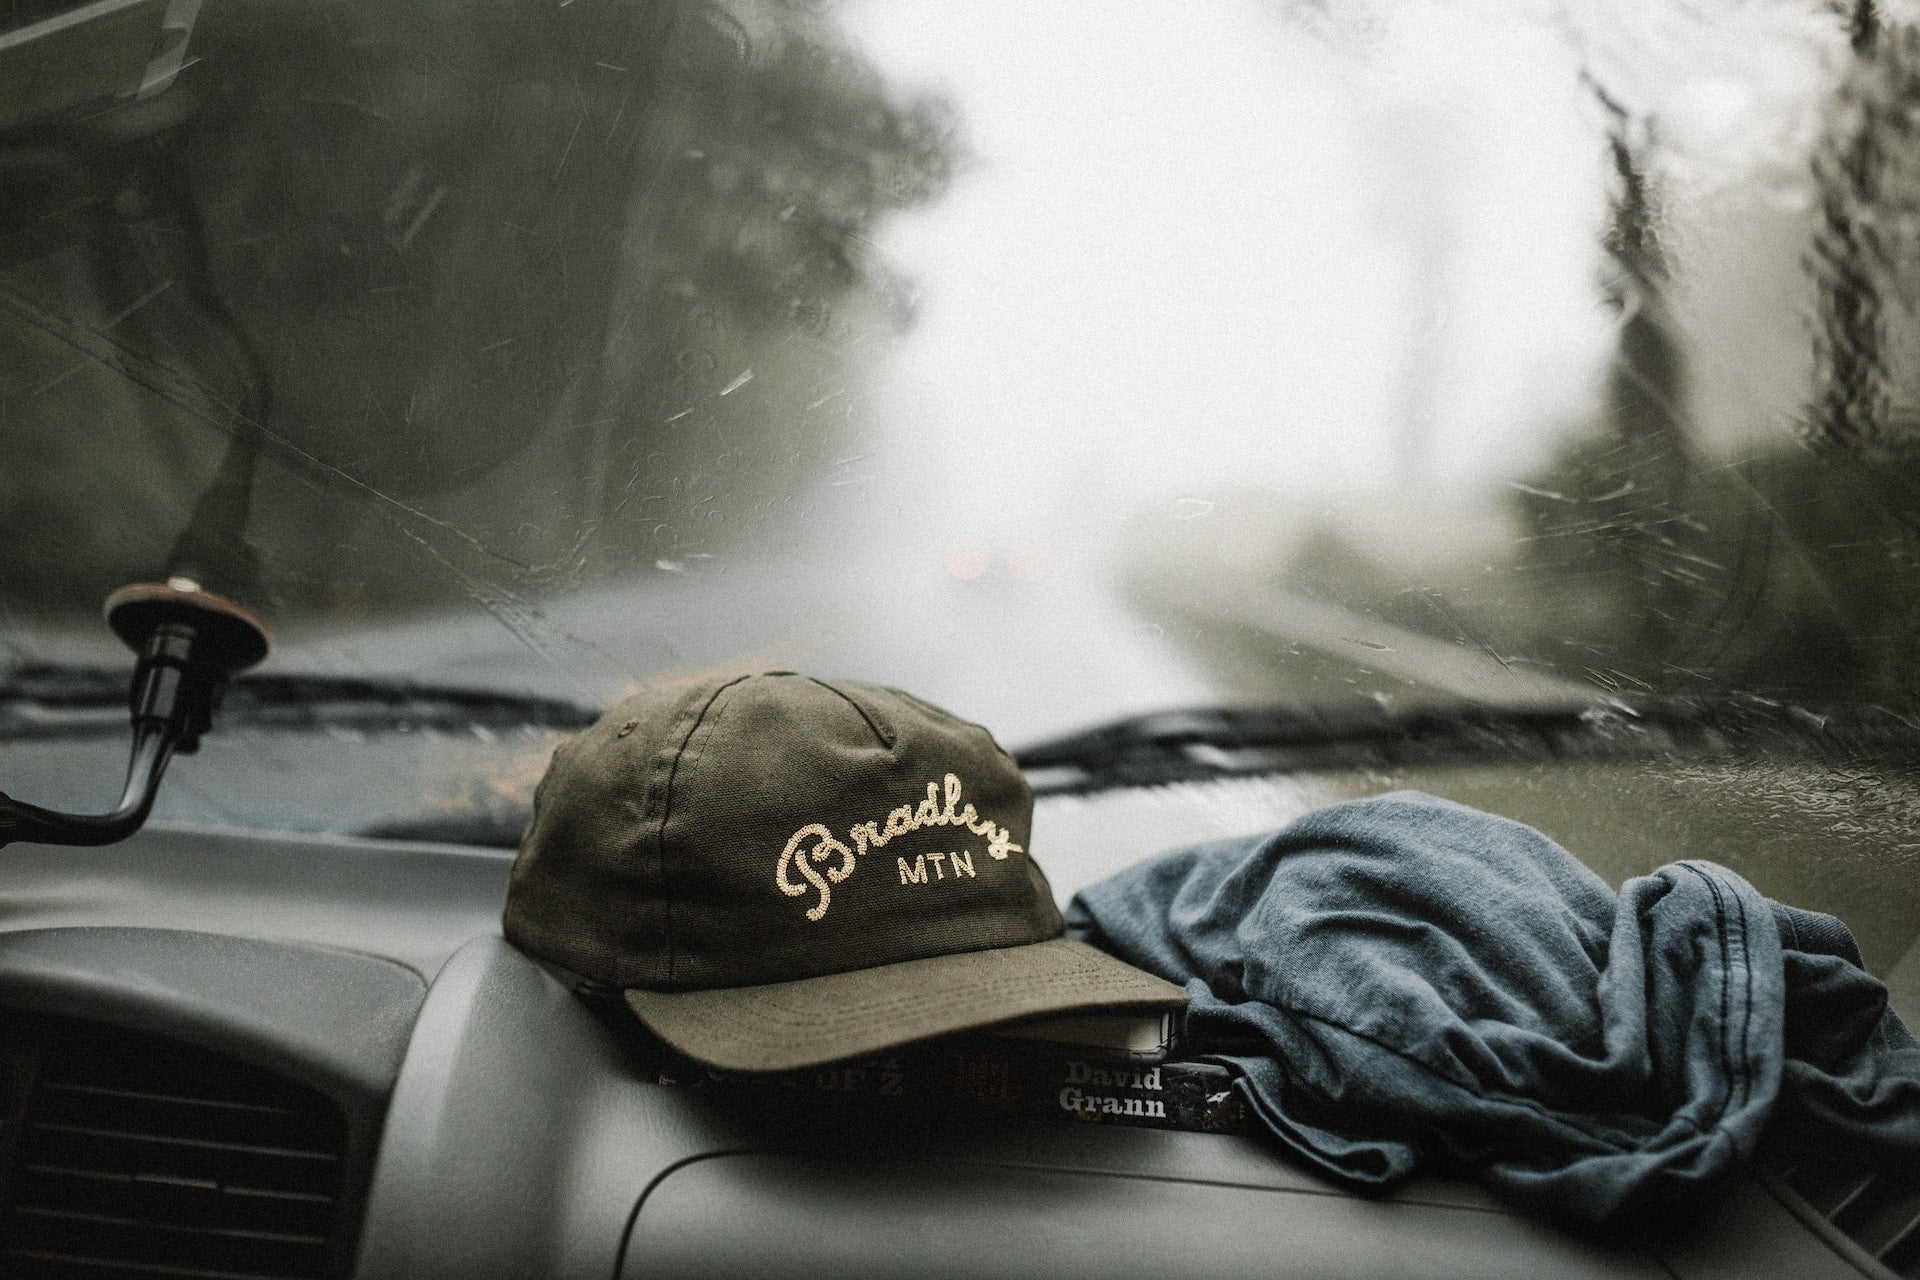 A 5 panel hat sits on the dashboard of a car